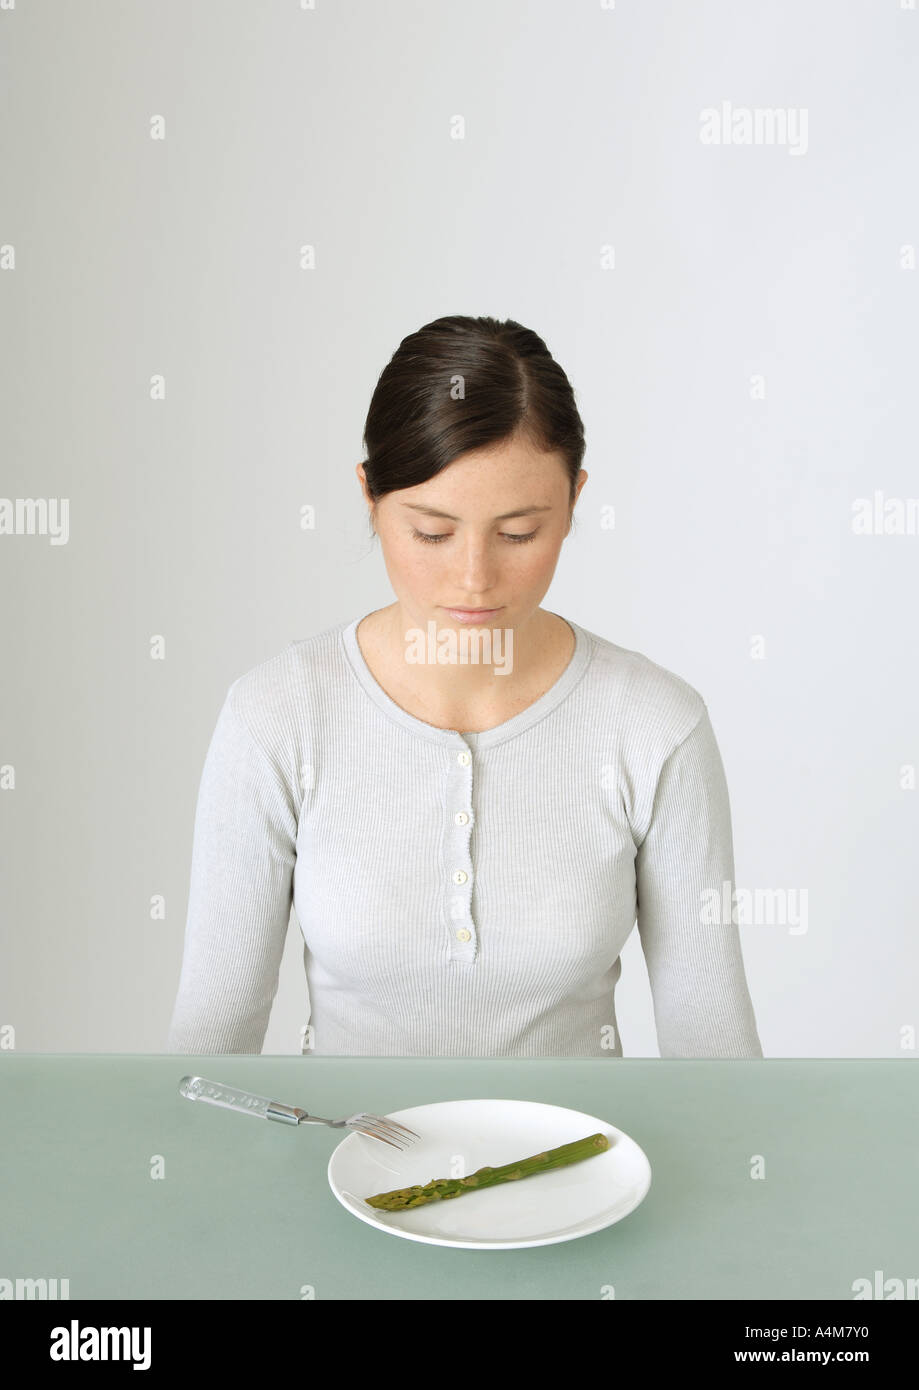 Young woman looking down at plate with single asparagus Stock Photo